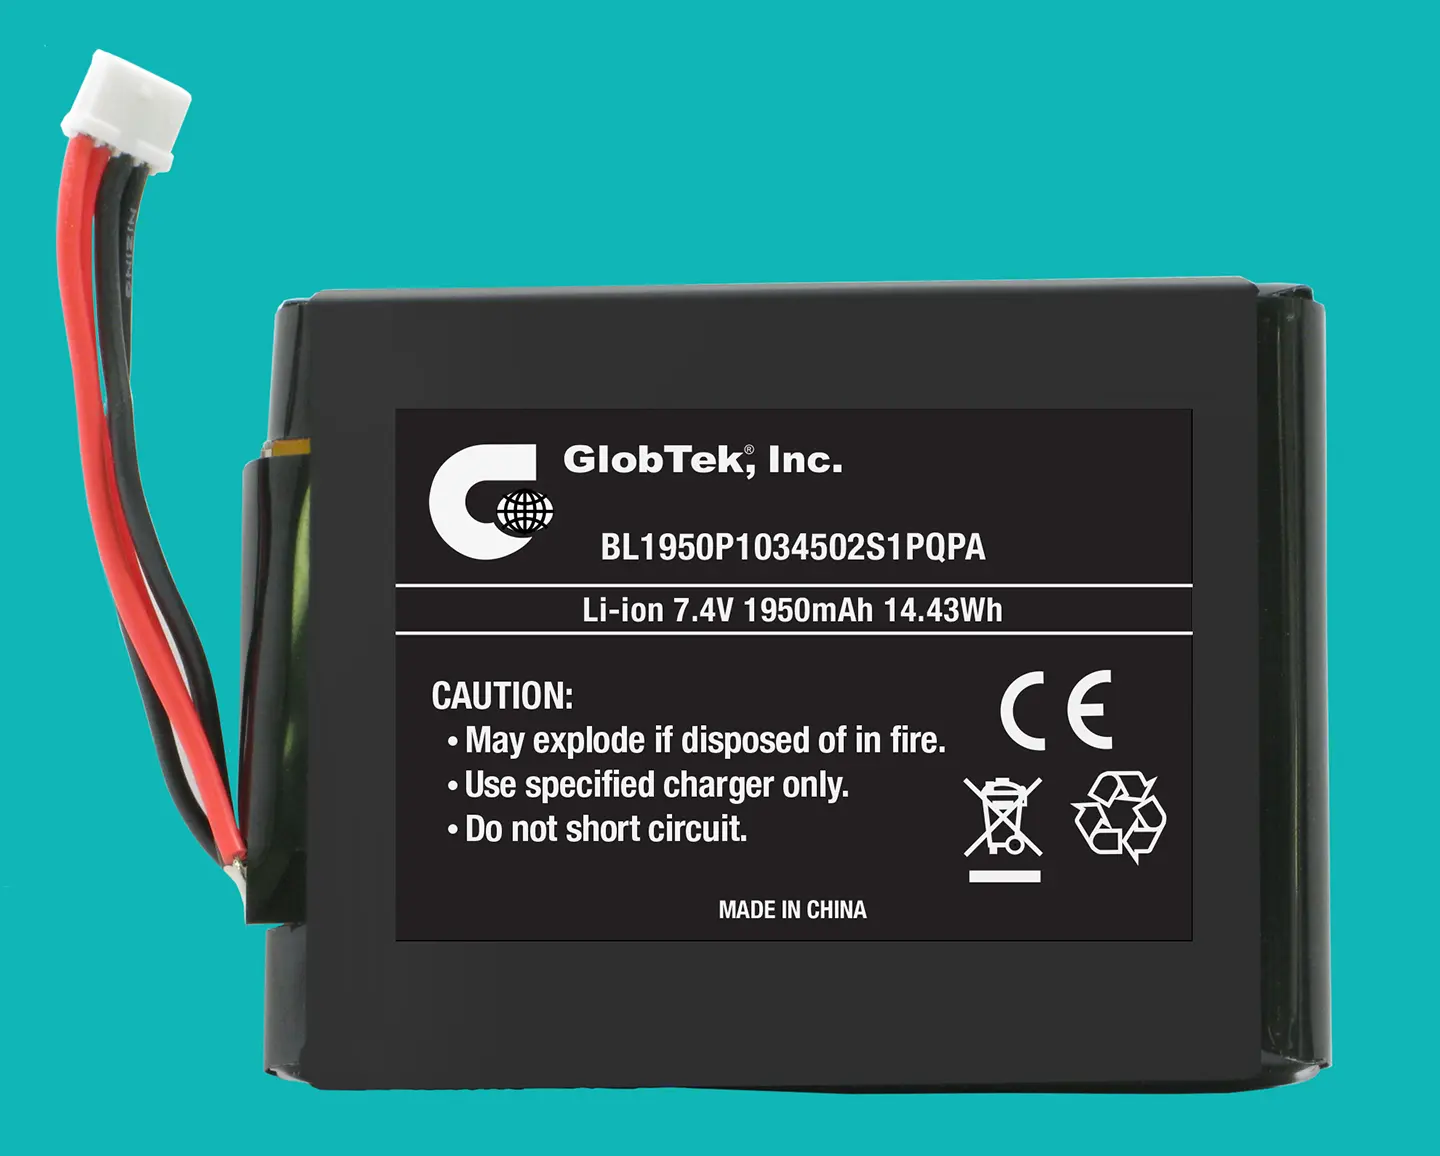 Li-Ion Prismatic Battery Pack from GlobTek, a 7.4V / 1950mAh  BL1950P1034502S1PQPA  Features UL 1642 Cell Approval and is designed to meet CE Mark which complies with 2004/108/EC Electromagnetic compatibility, including EN61000-6-1:2007, EN61000-6-3:2007!